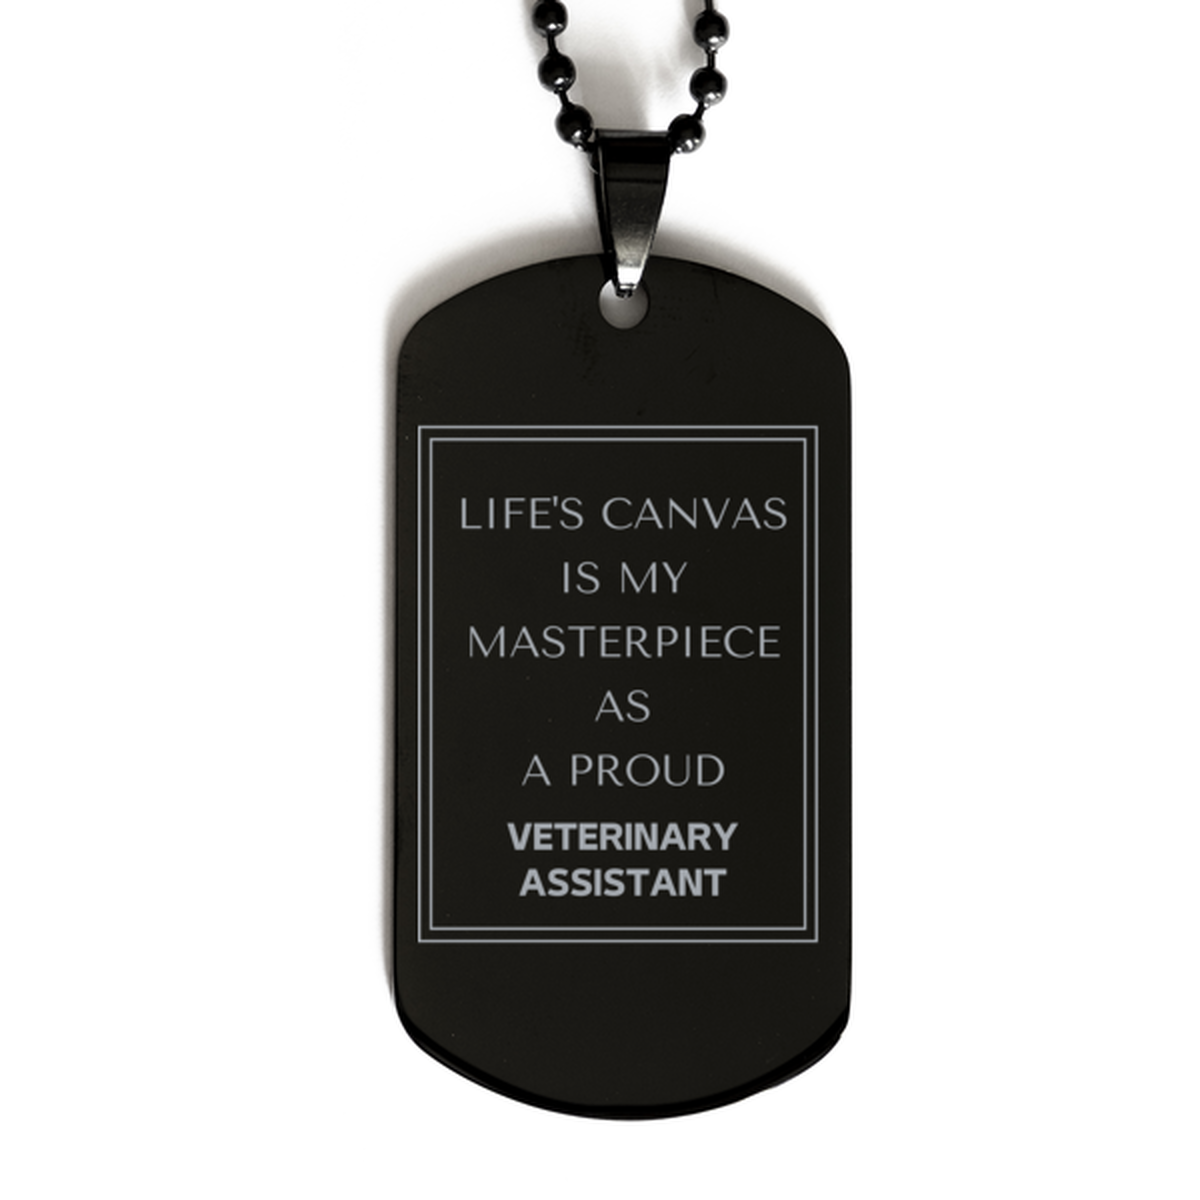 Proud Veterinary Assistant Gifts, Life's canvas is my masterpiece, Epic Birthday Christmas Unique Black Dog Tag For Veterinary Assistant, Coworkers, Men, Women, Friends